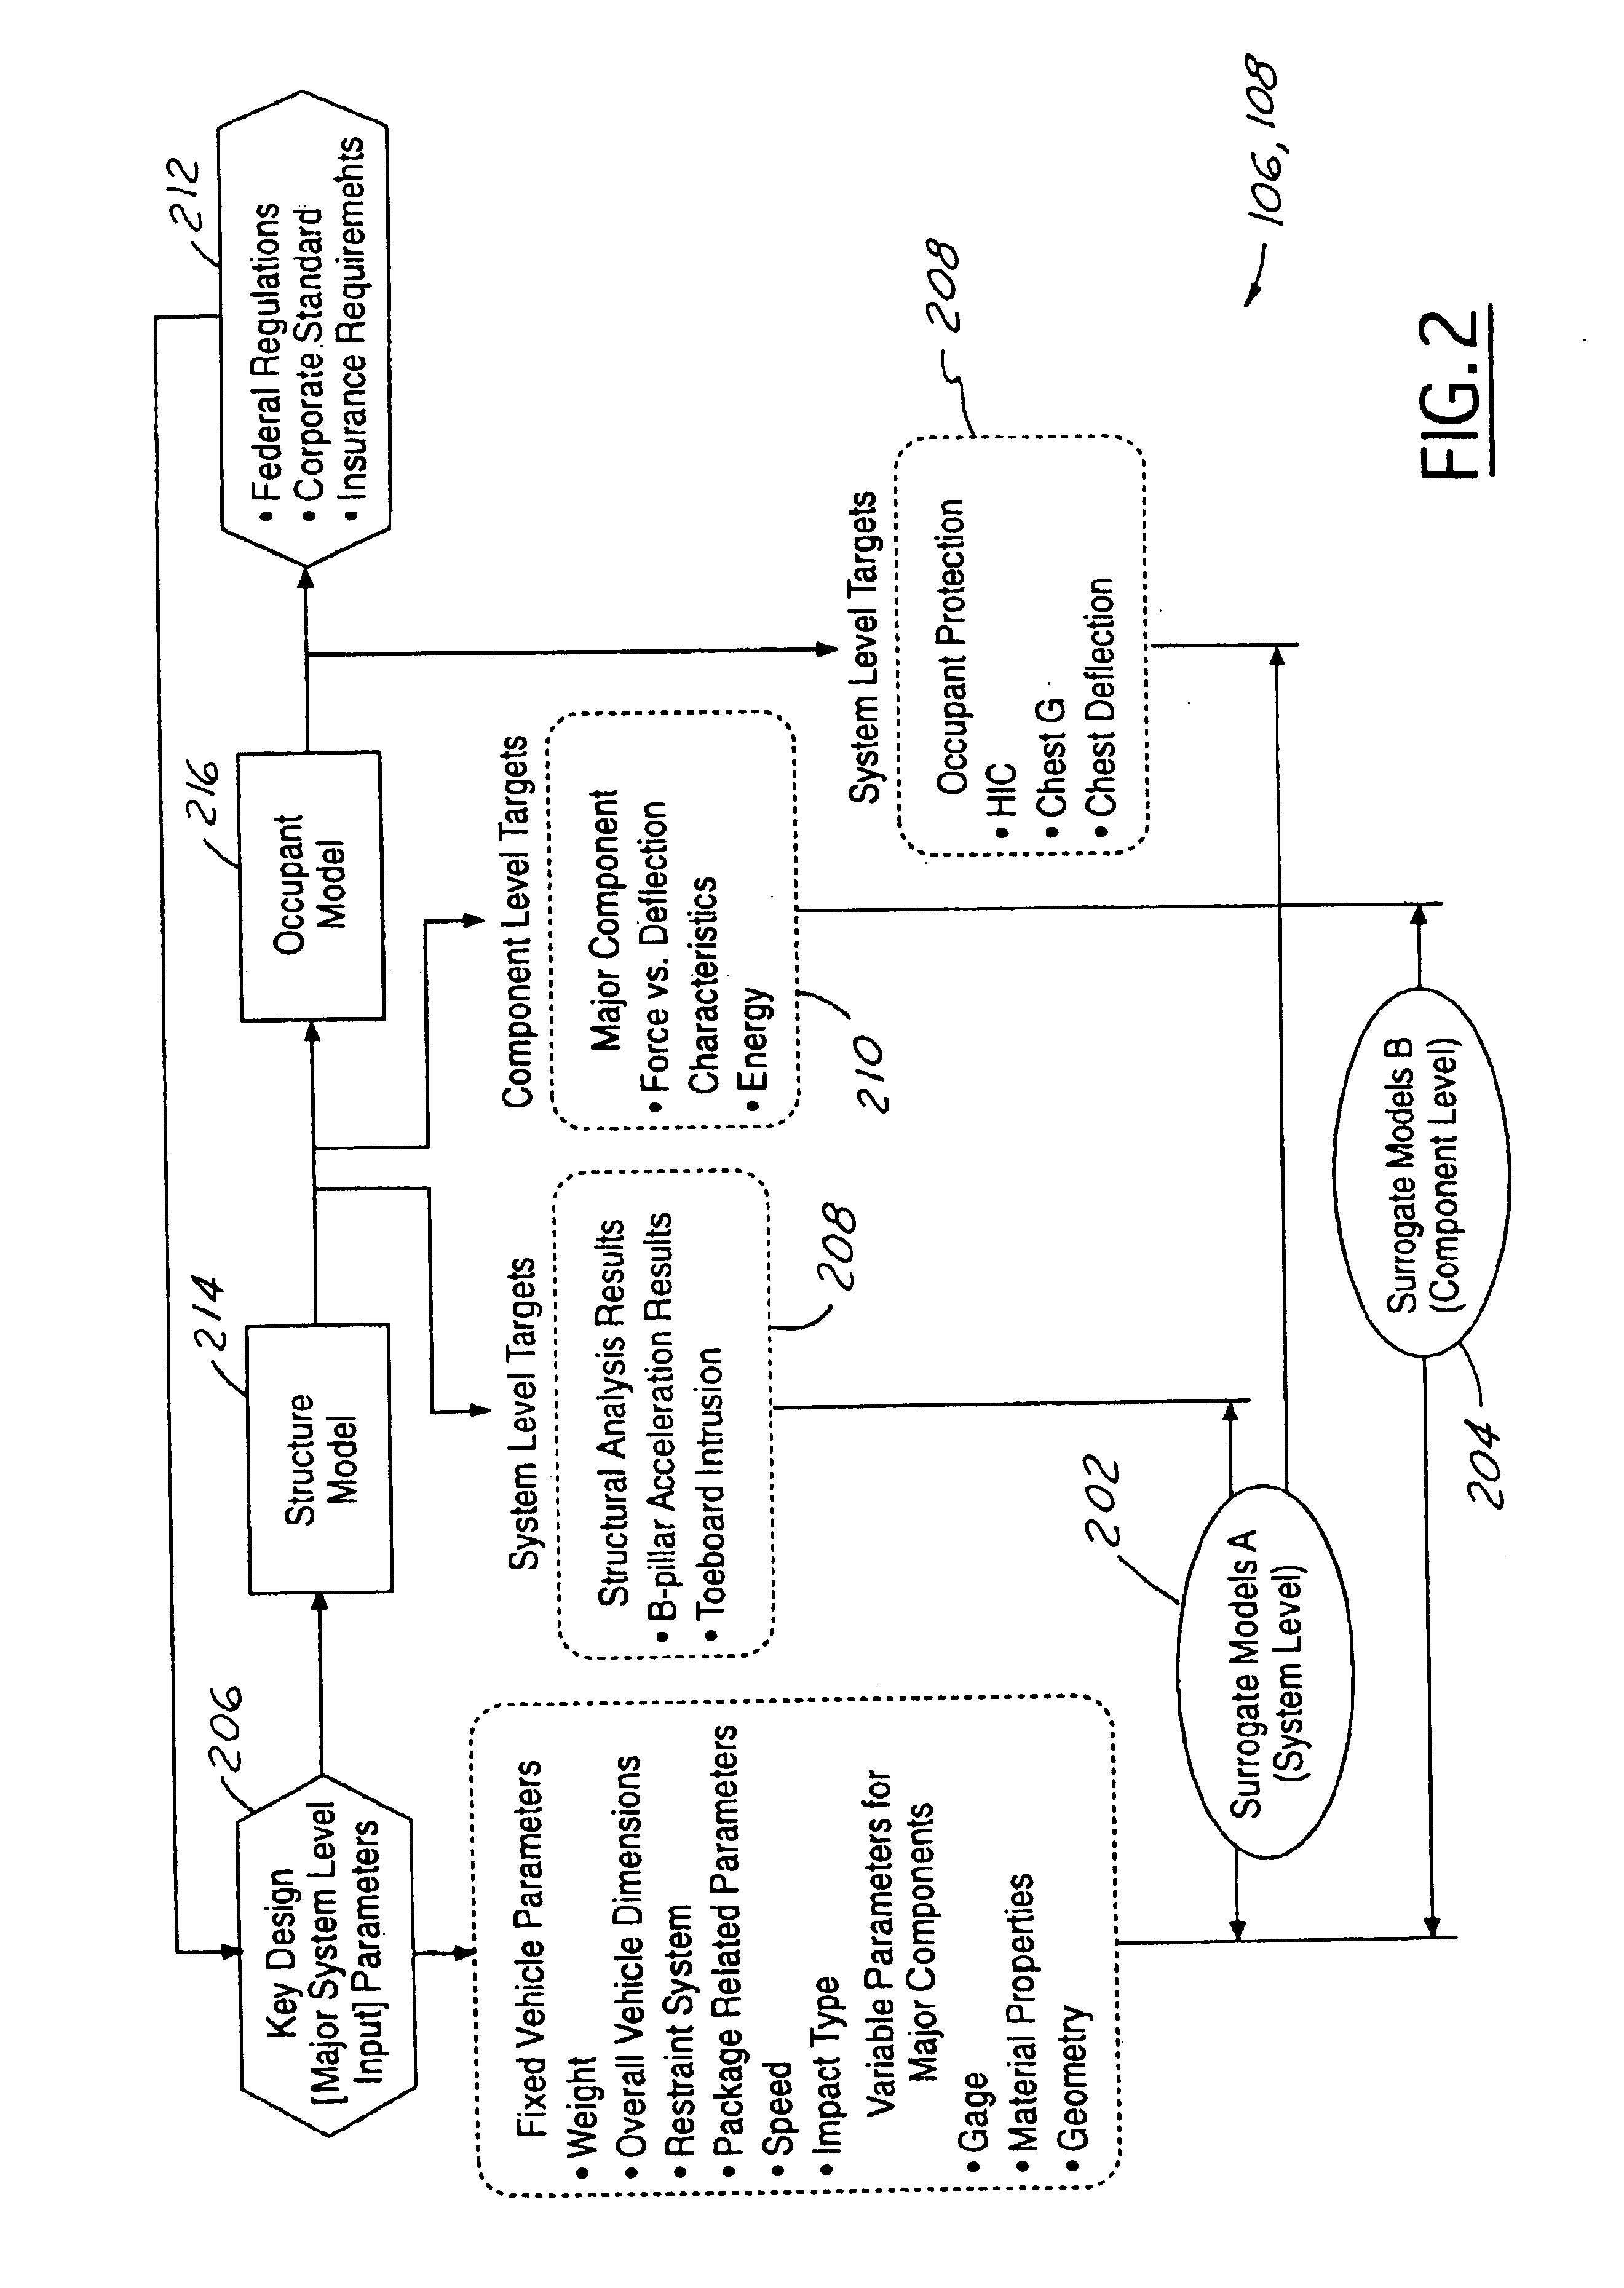 Method for cascading vehicle system targets to component level design objectives